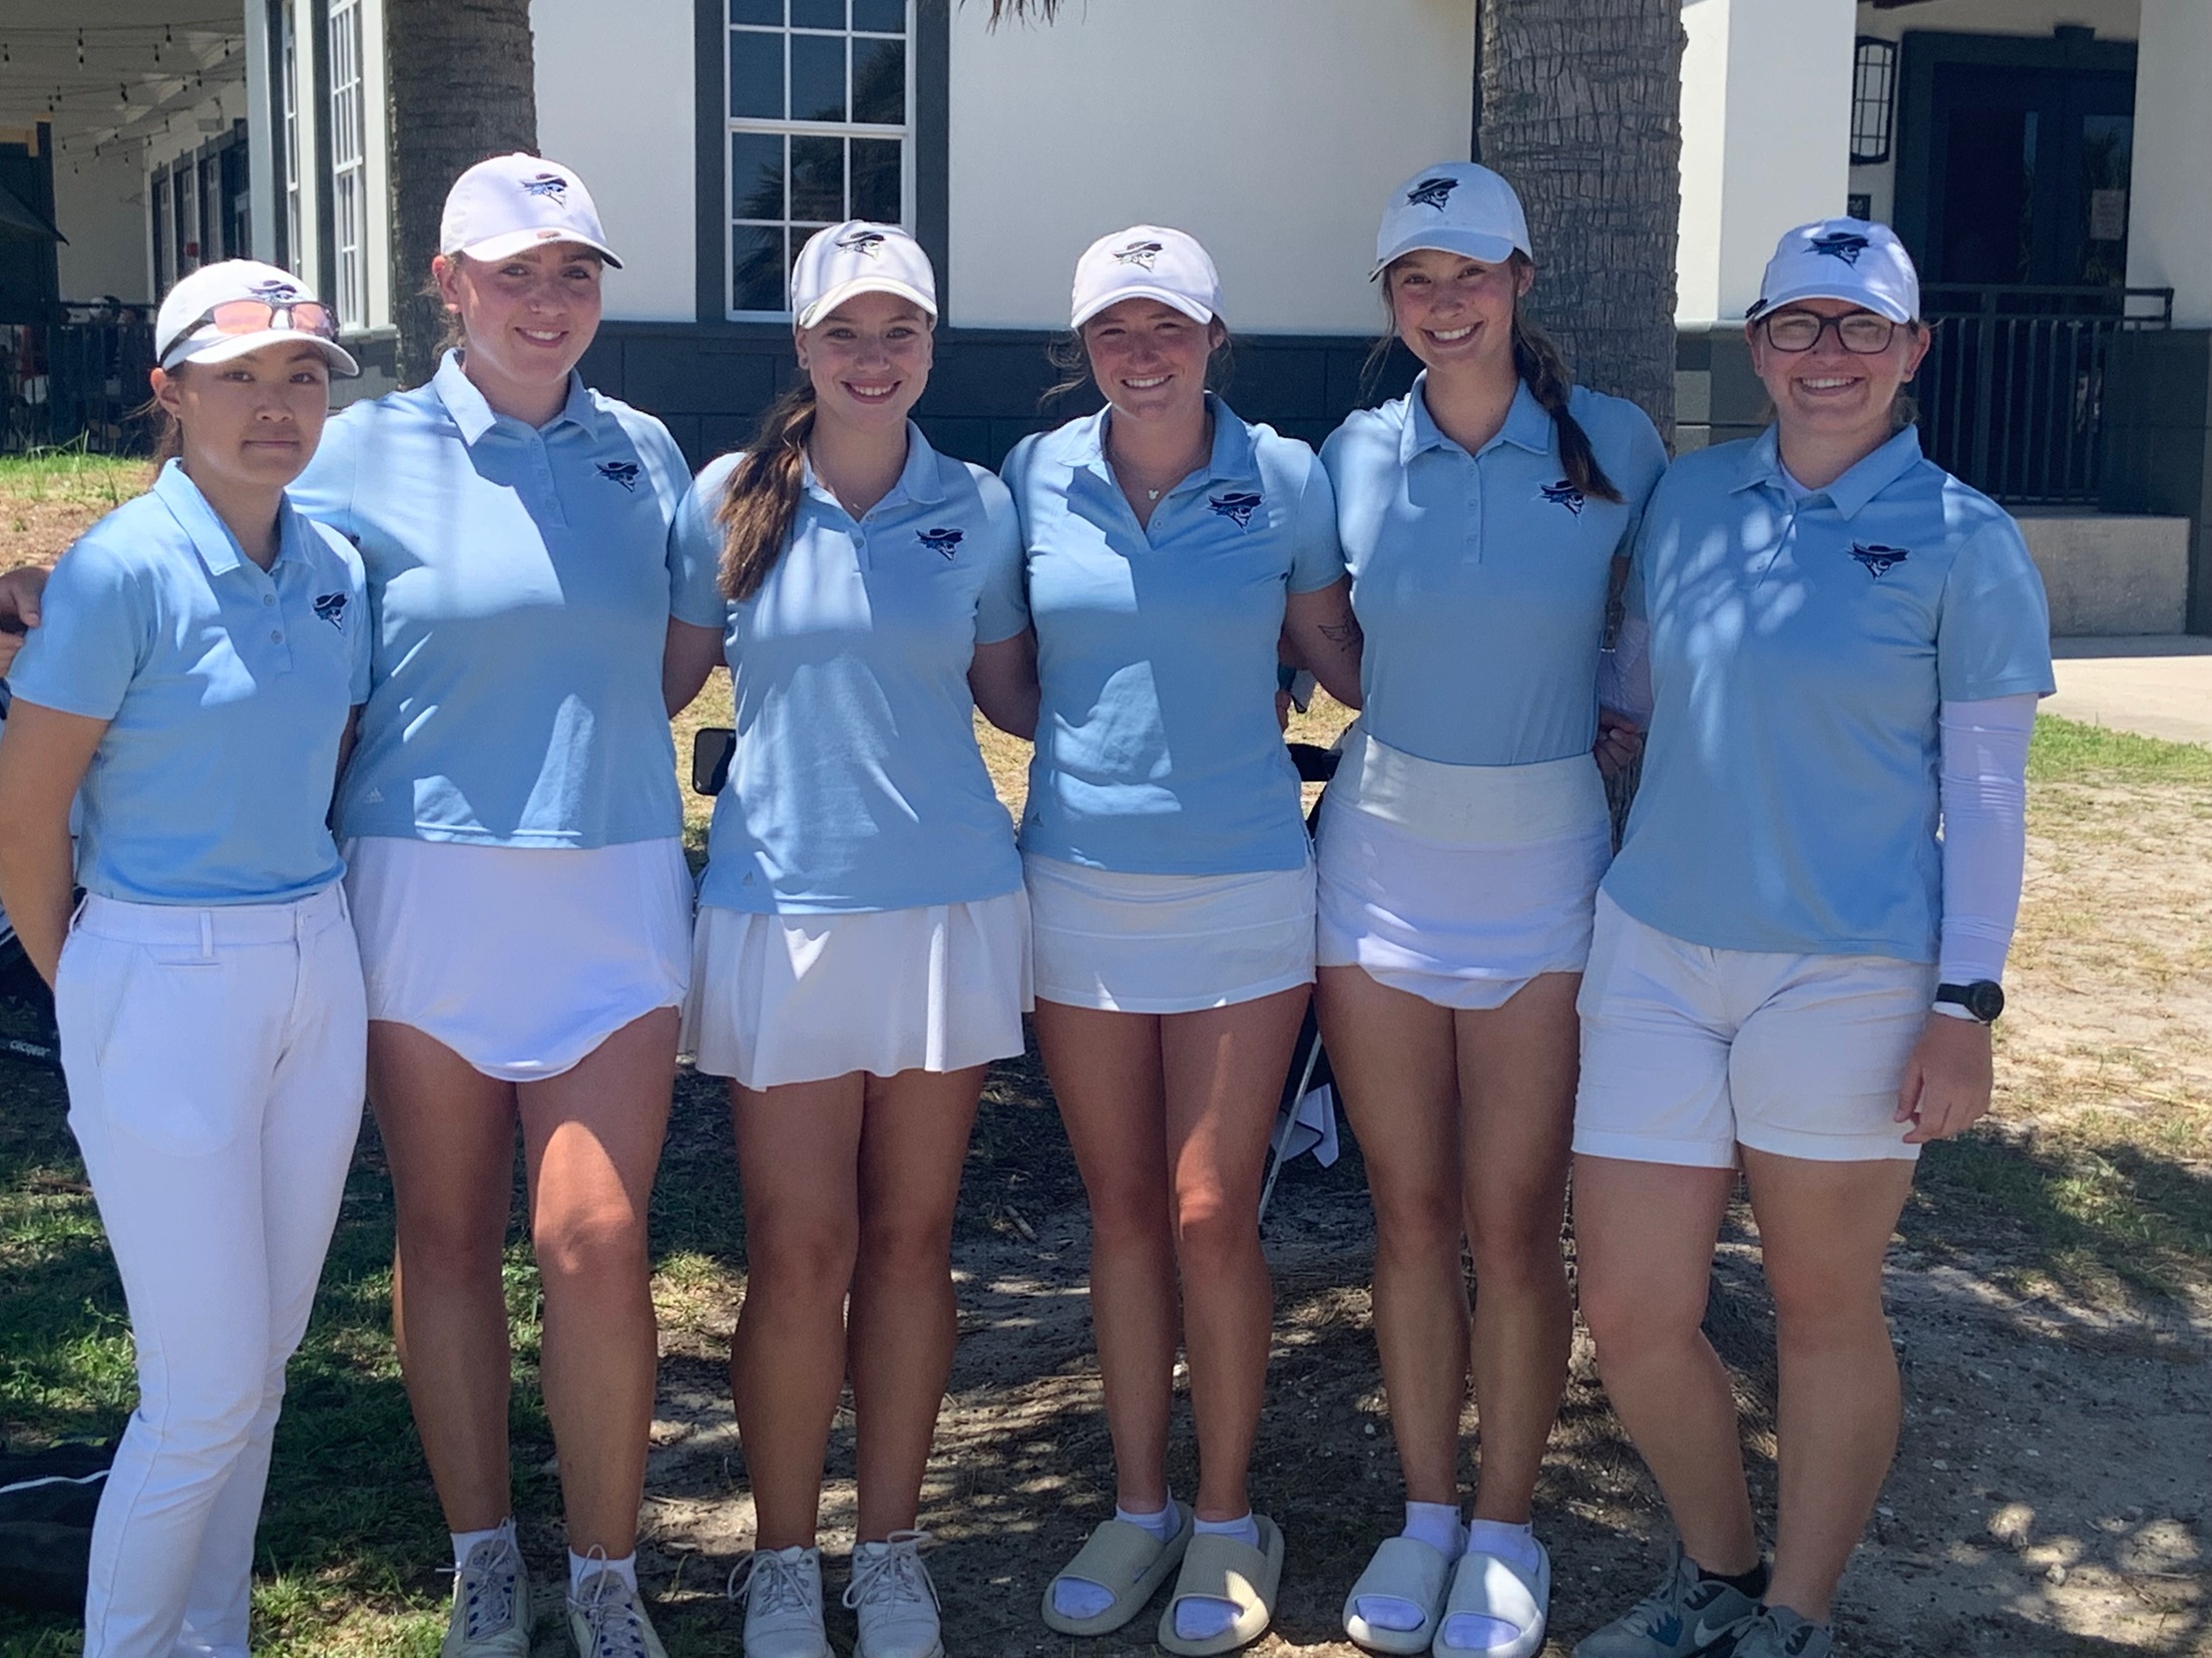 Women's Golf Ends Their Season in 6th Place at Nationals